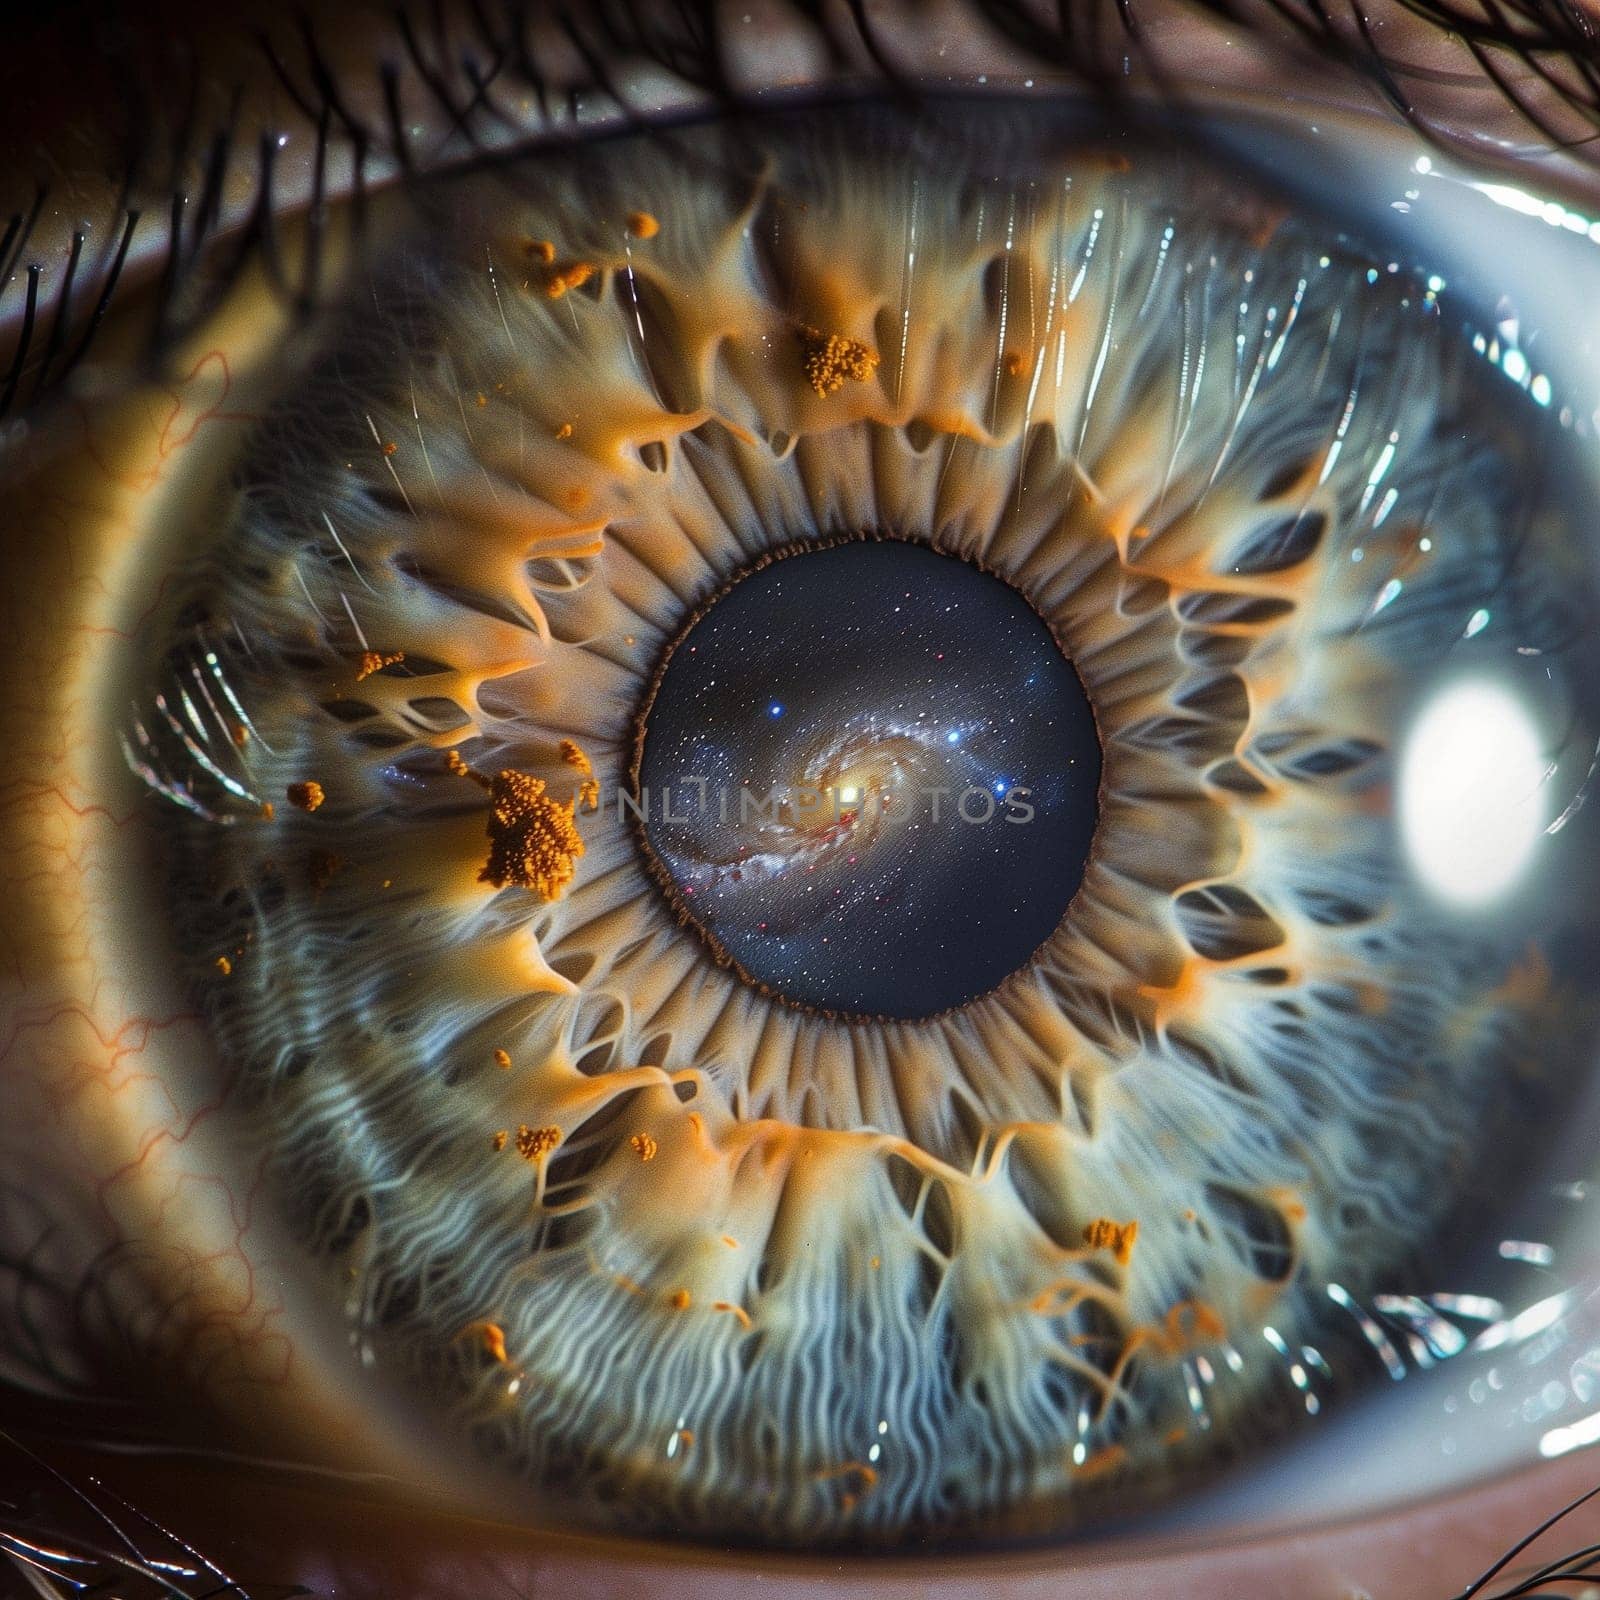 Beautiful close-up photo of the eye by NeuroSky